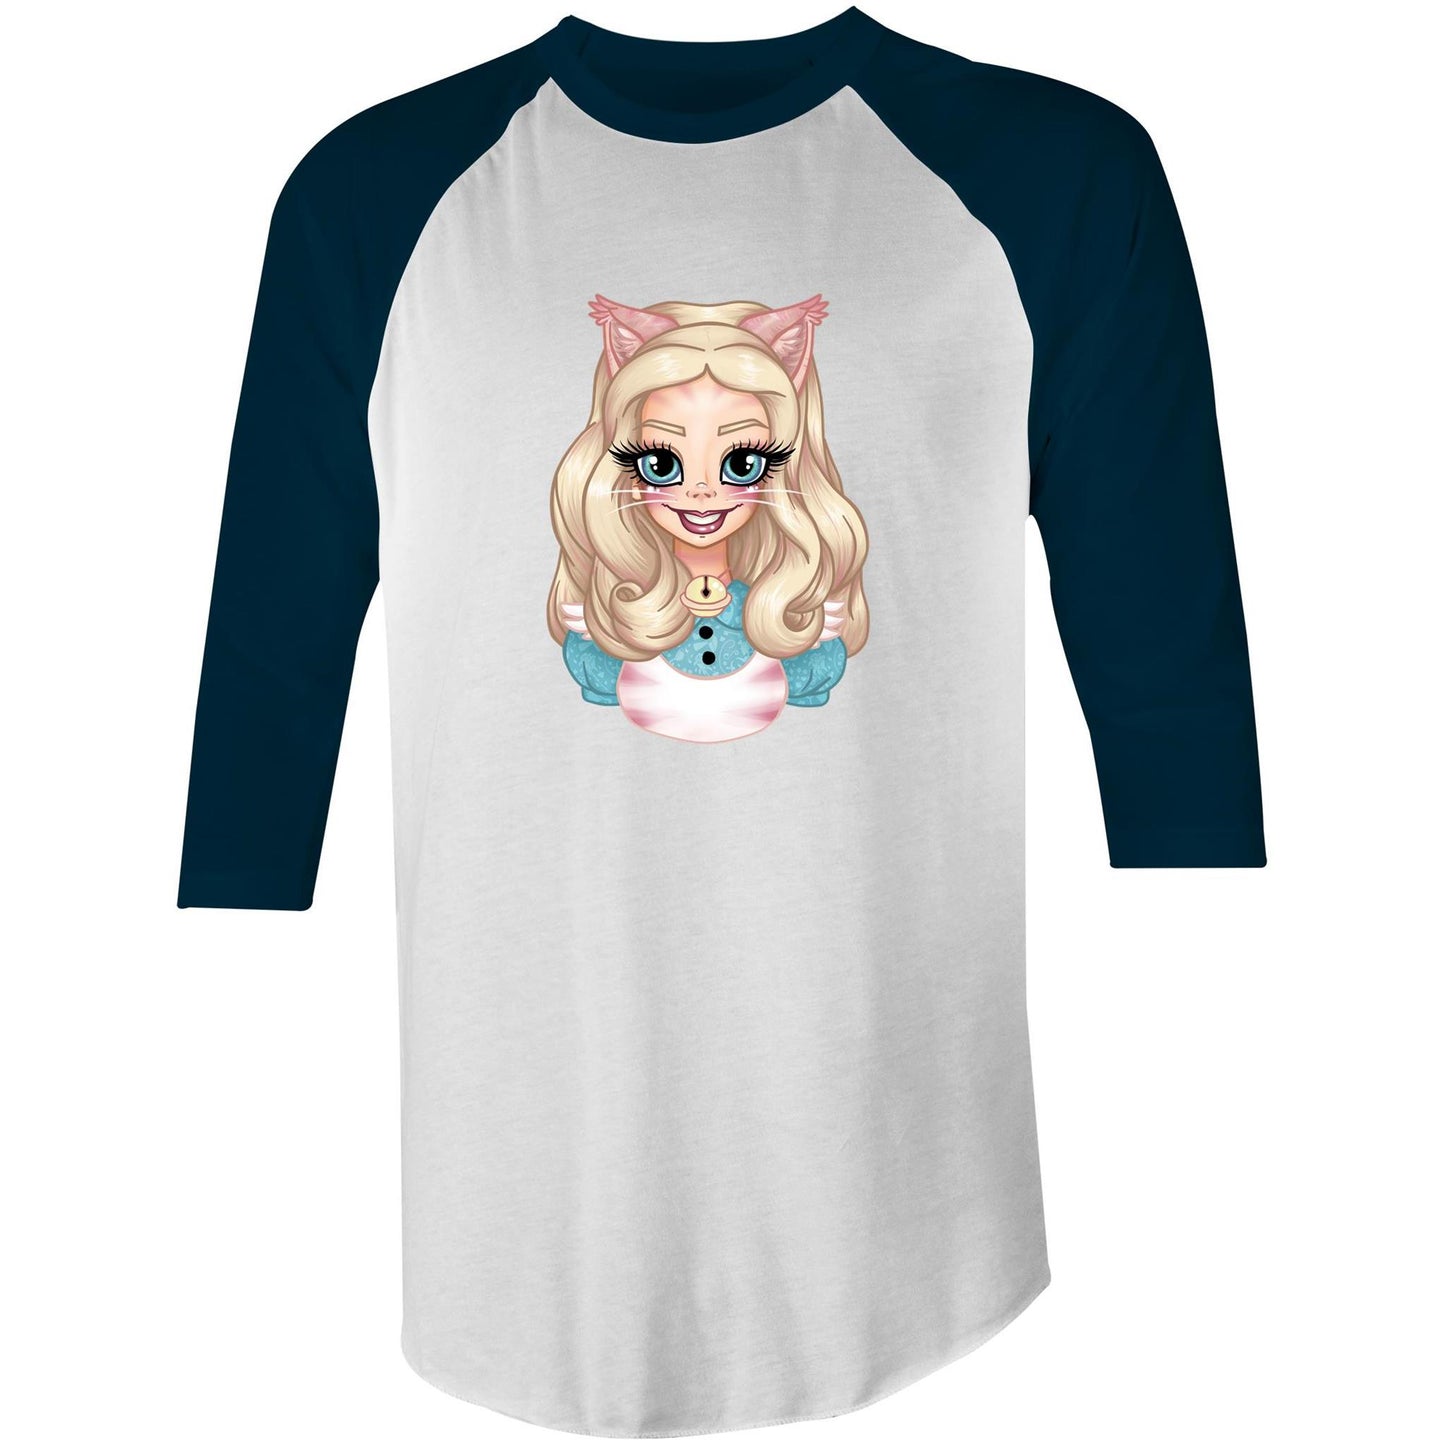 Alice - 3/4 Sleeve T-Shirt - 2 Colors - Online Ordering Only